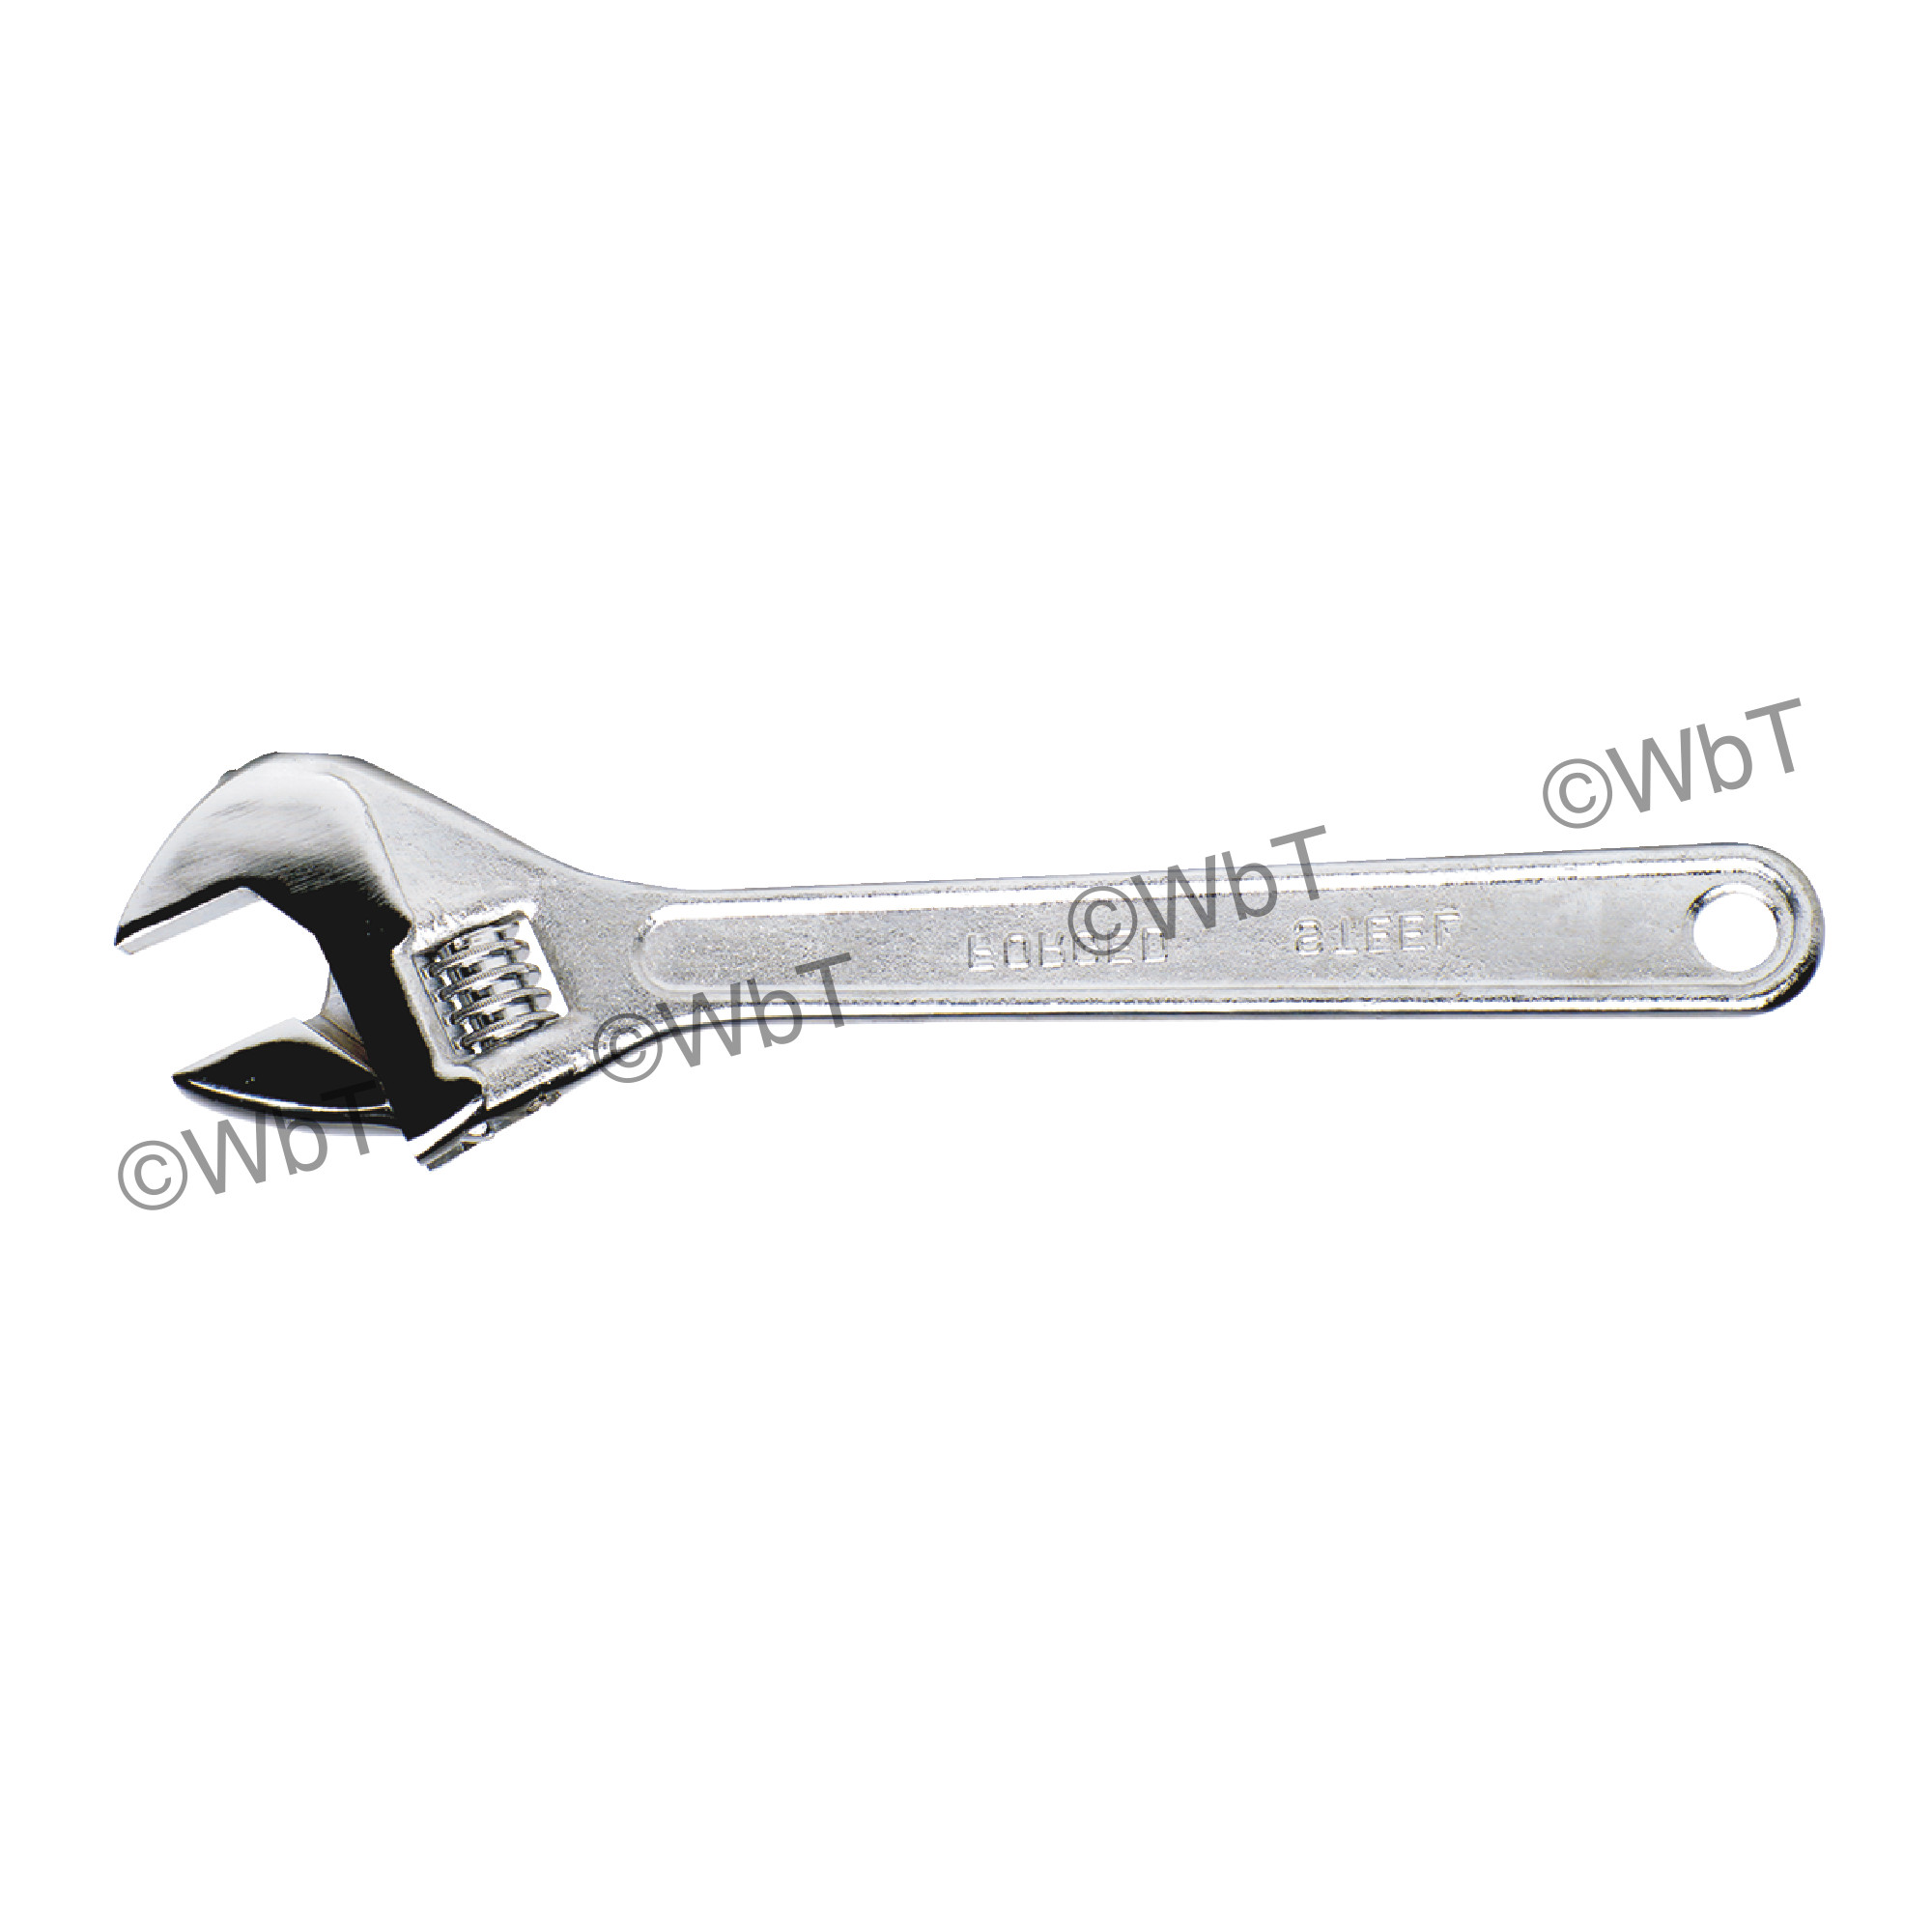 Adjustable Wrench - Model: 5034   SIZE: 12"   Capacity: 1-5/16"